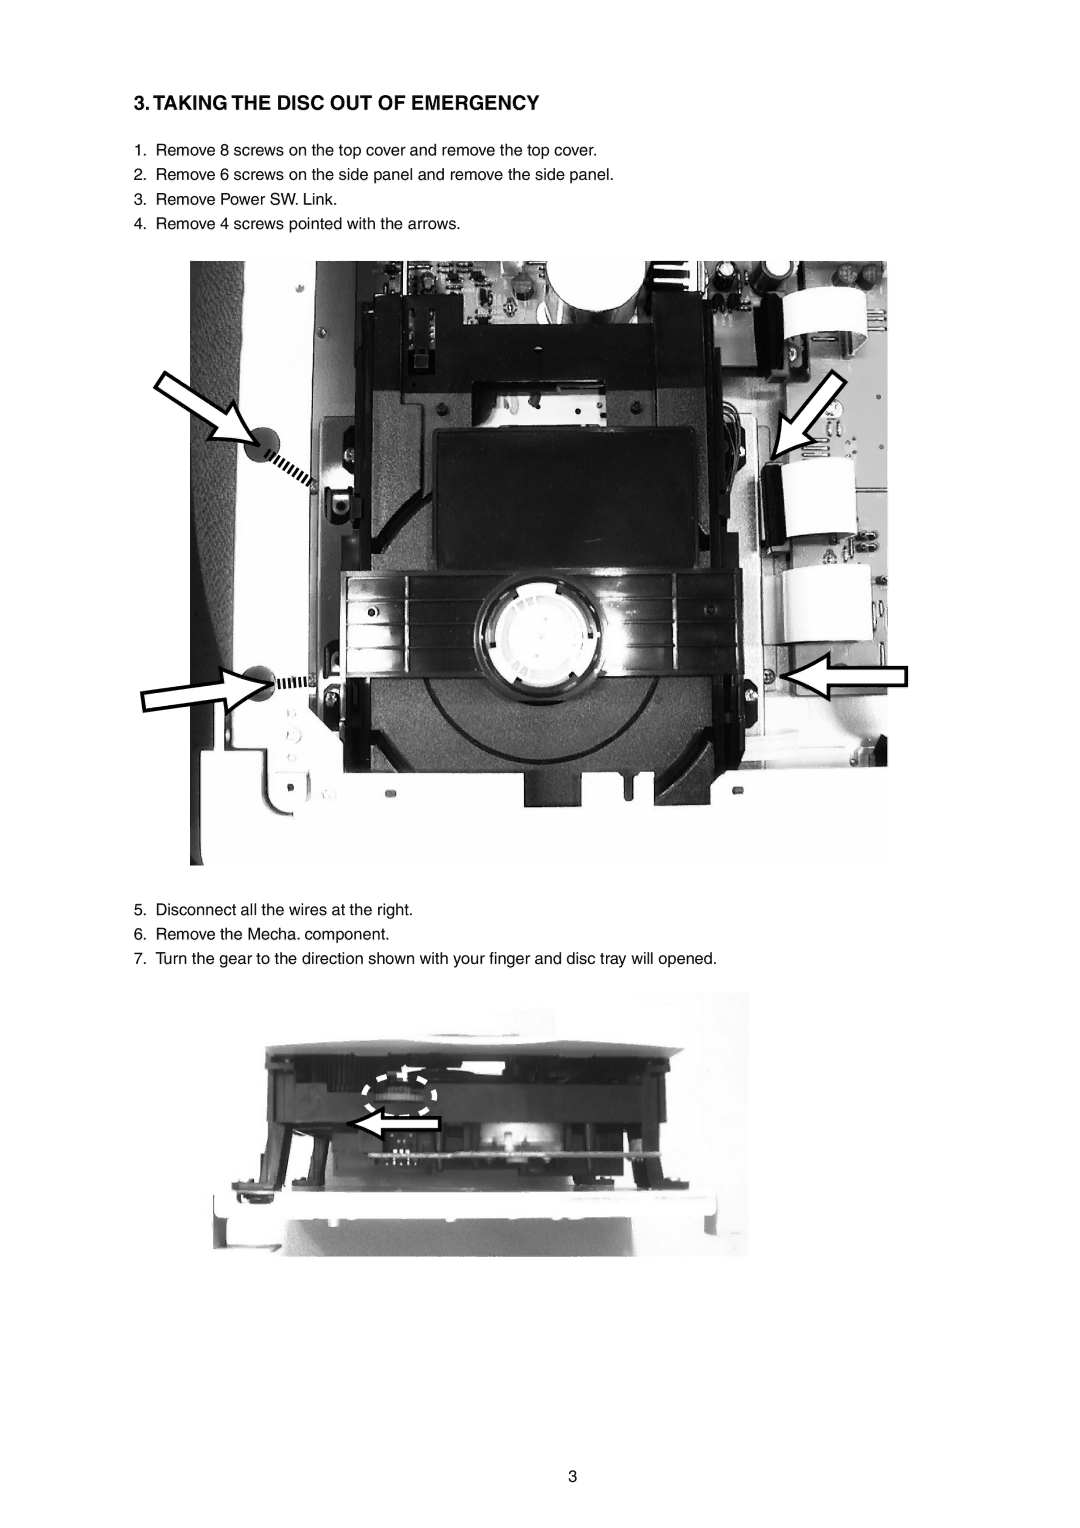 Marantz SA-17S1 service manual Taking the Disc OUT of Emergency 